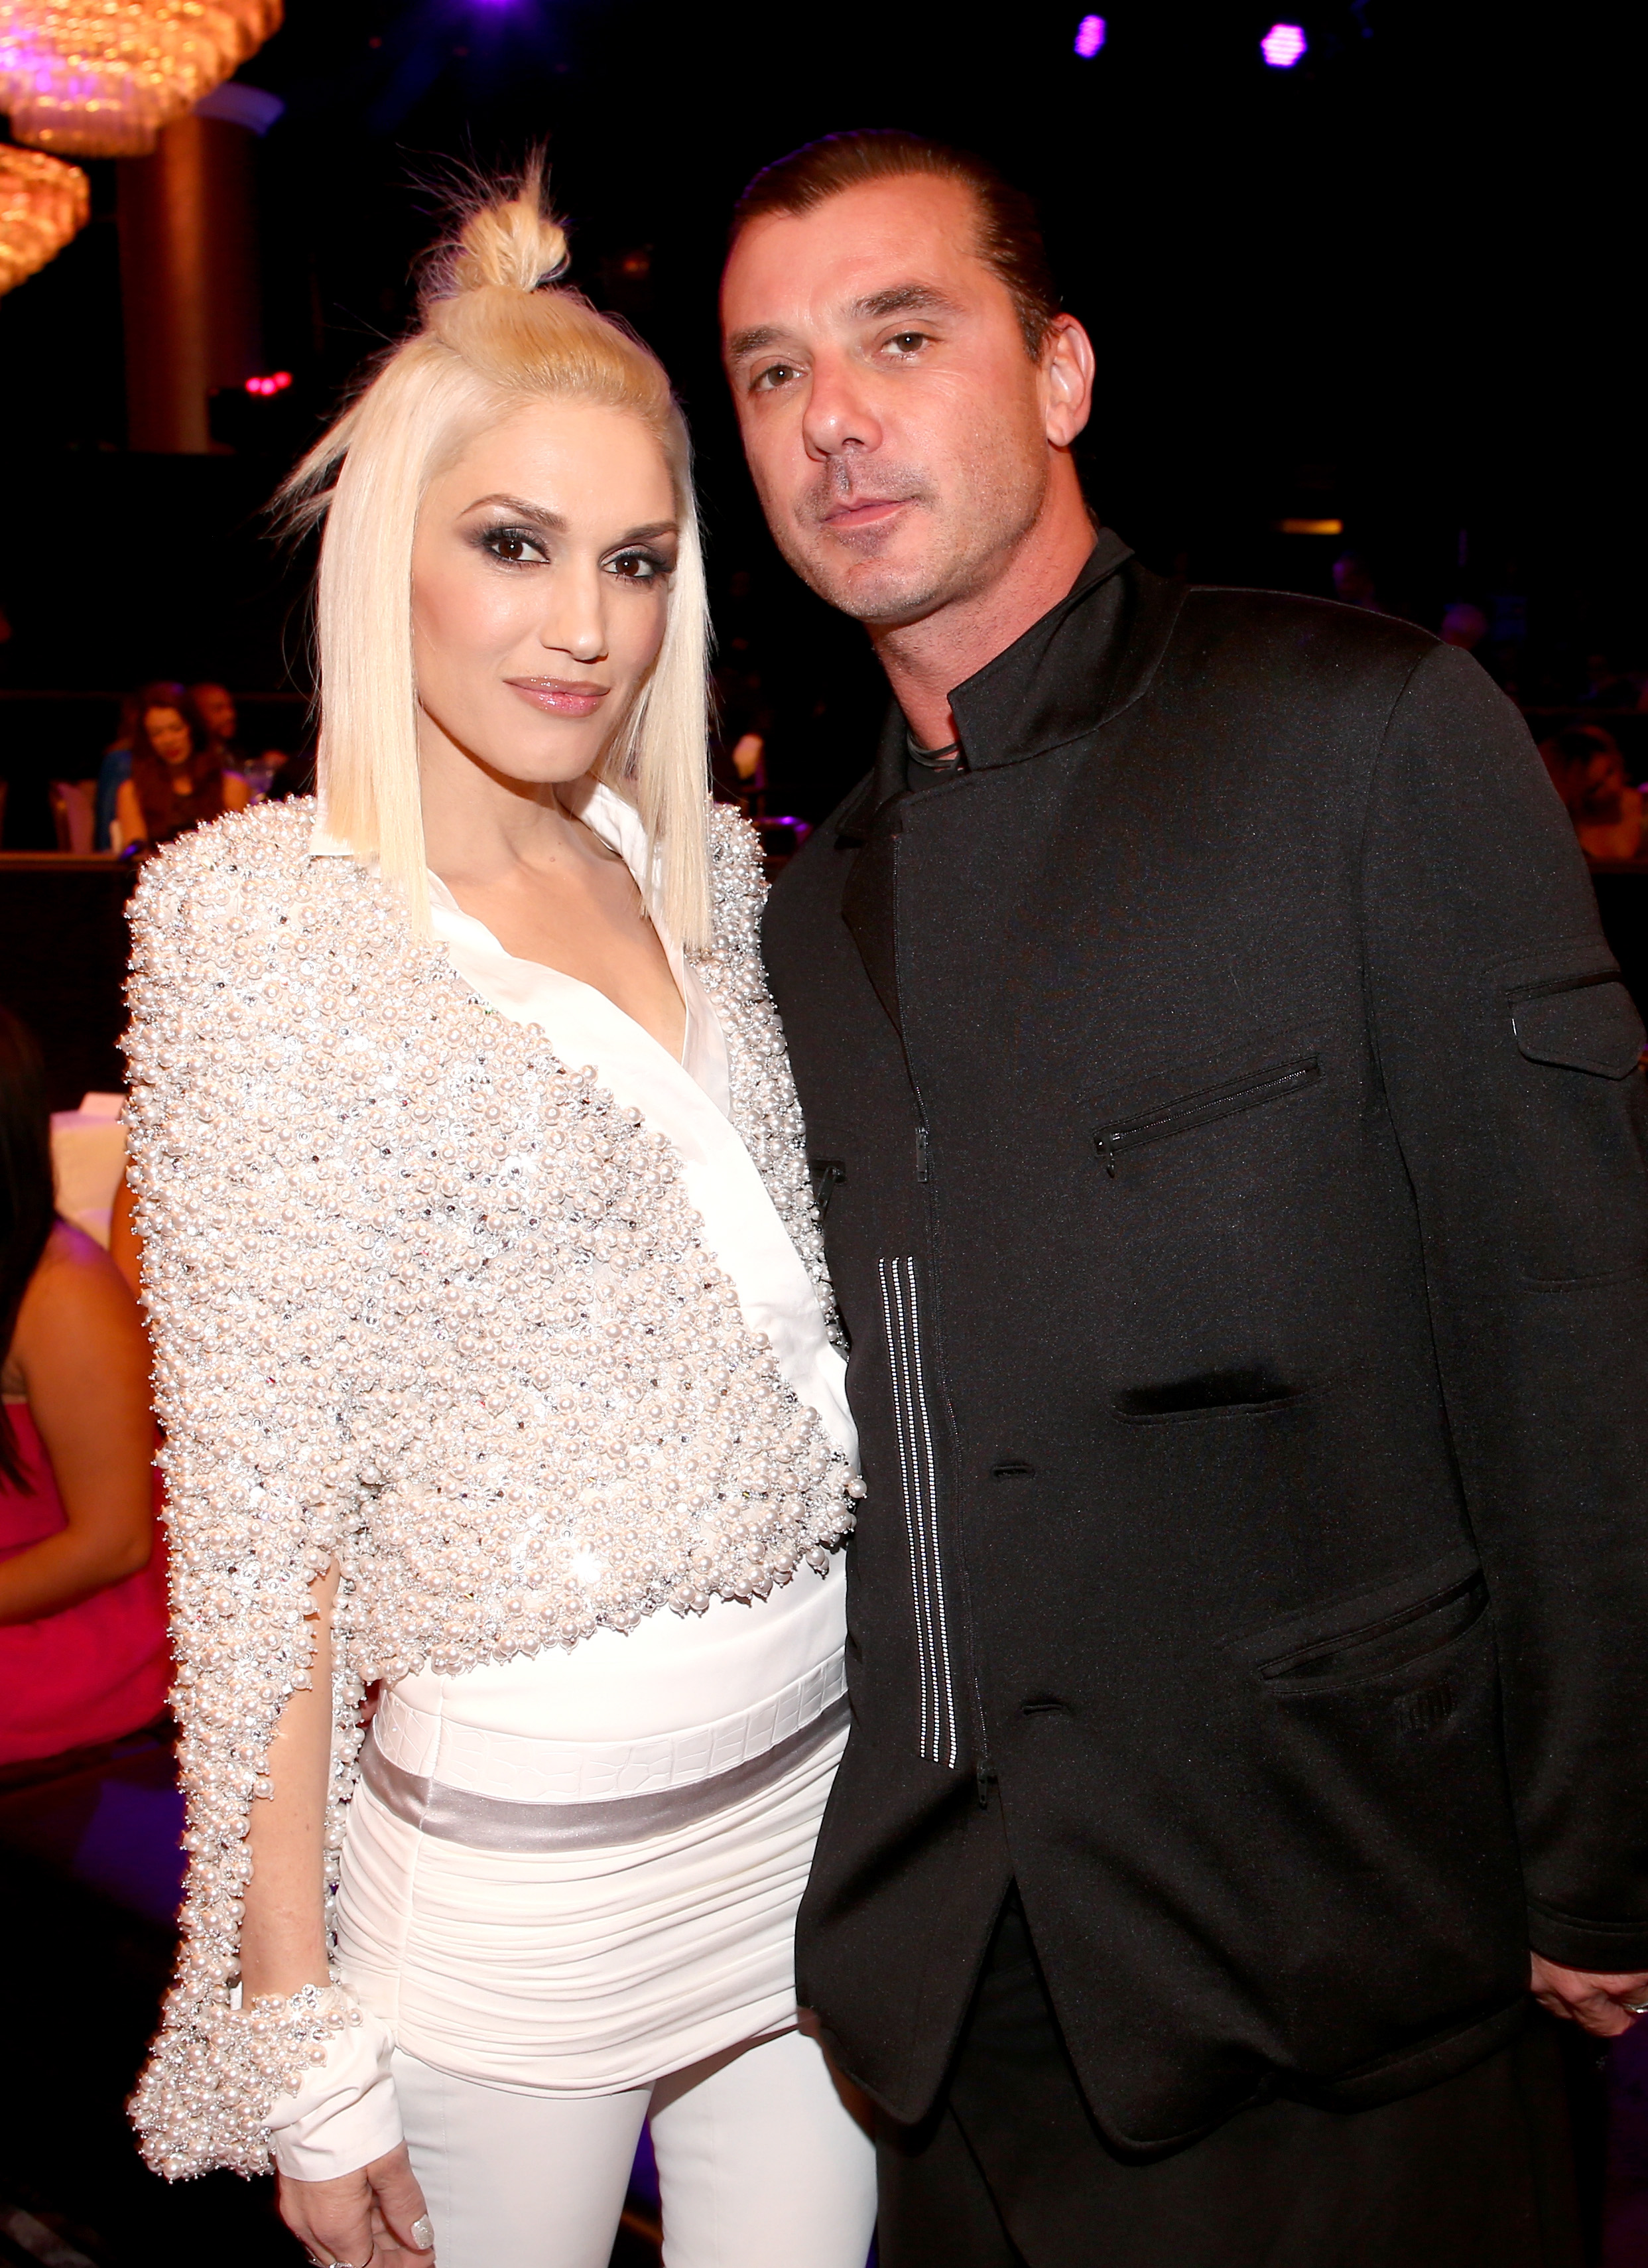 Find Out Why Gavin Rossdale is Still Wearing His Wedding Ring After